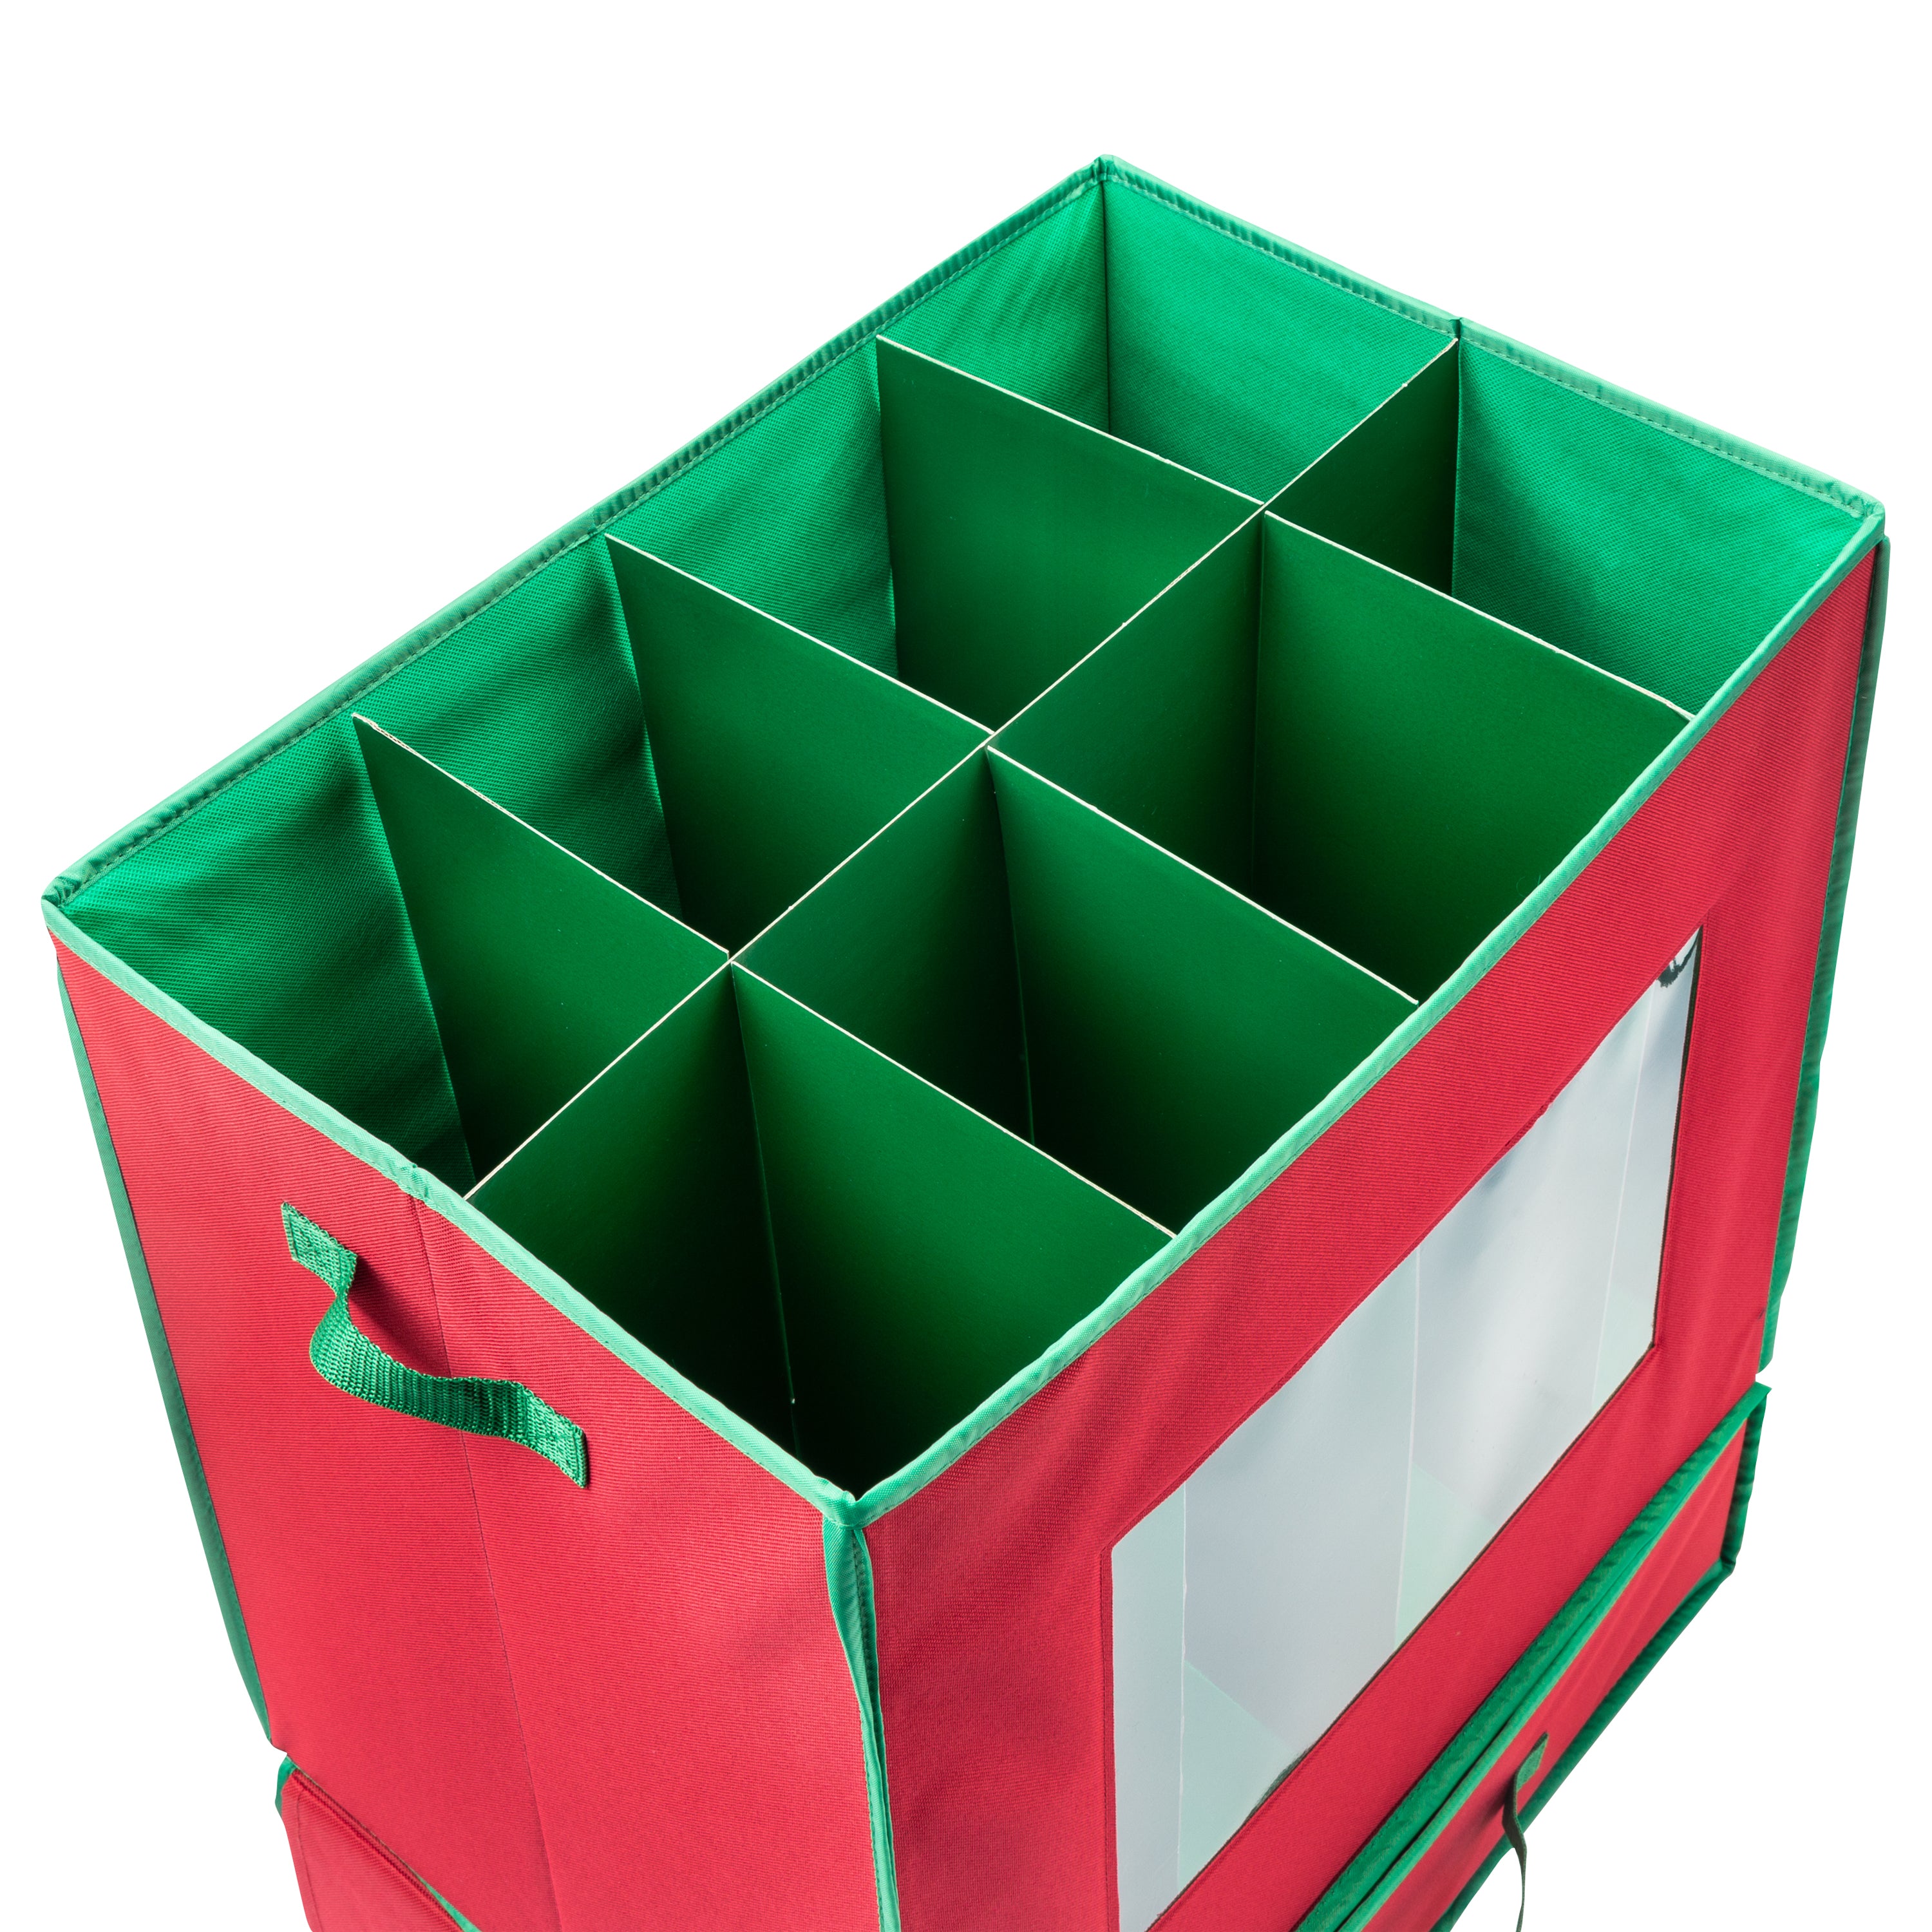 Honey-Can-Do Holiday Decorations Storage Box Red